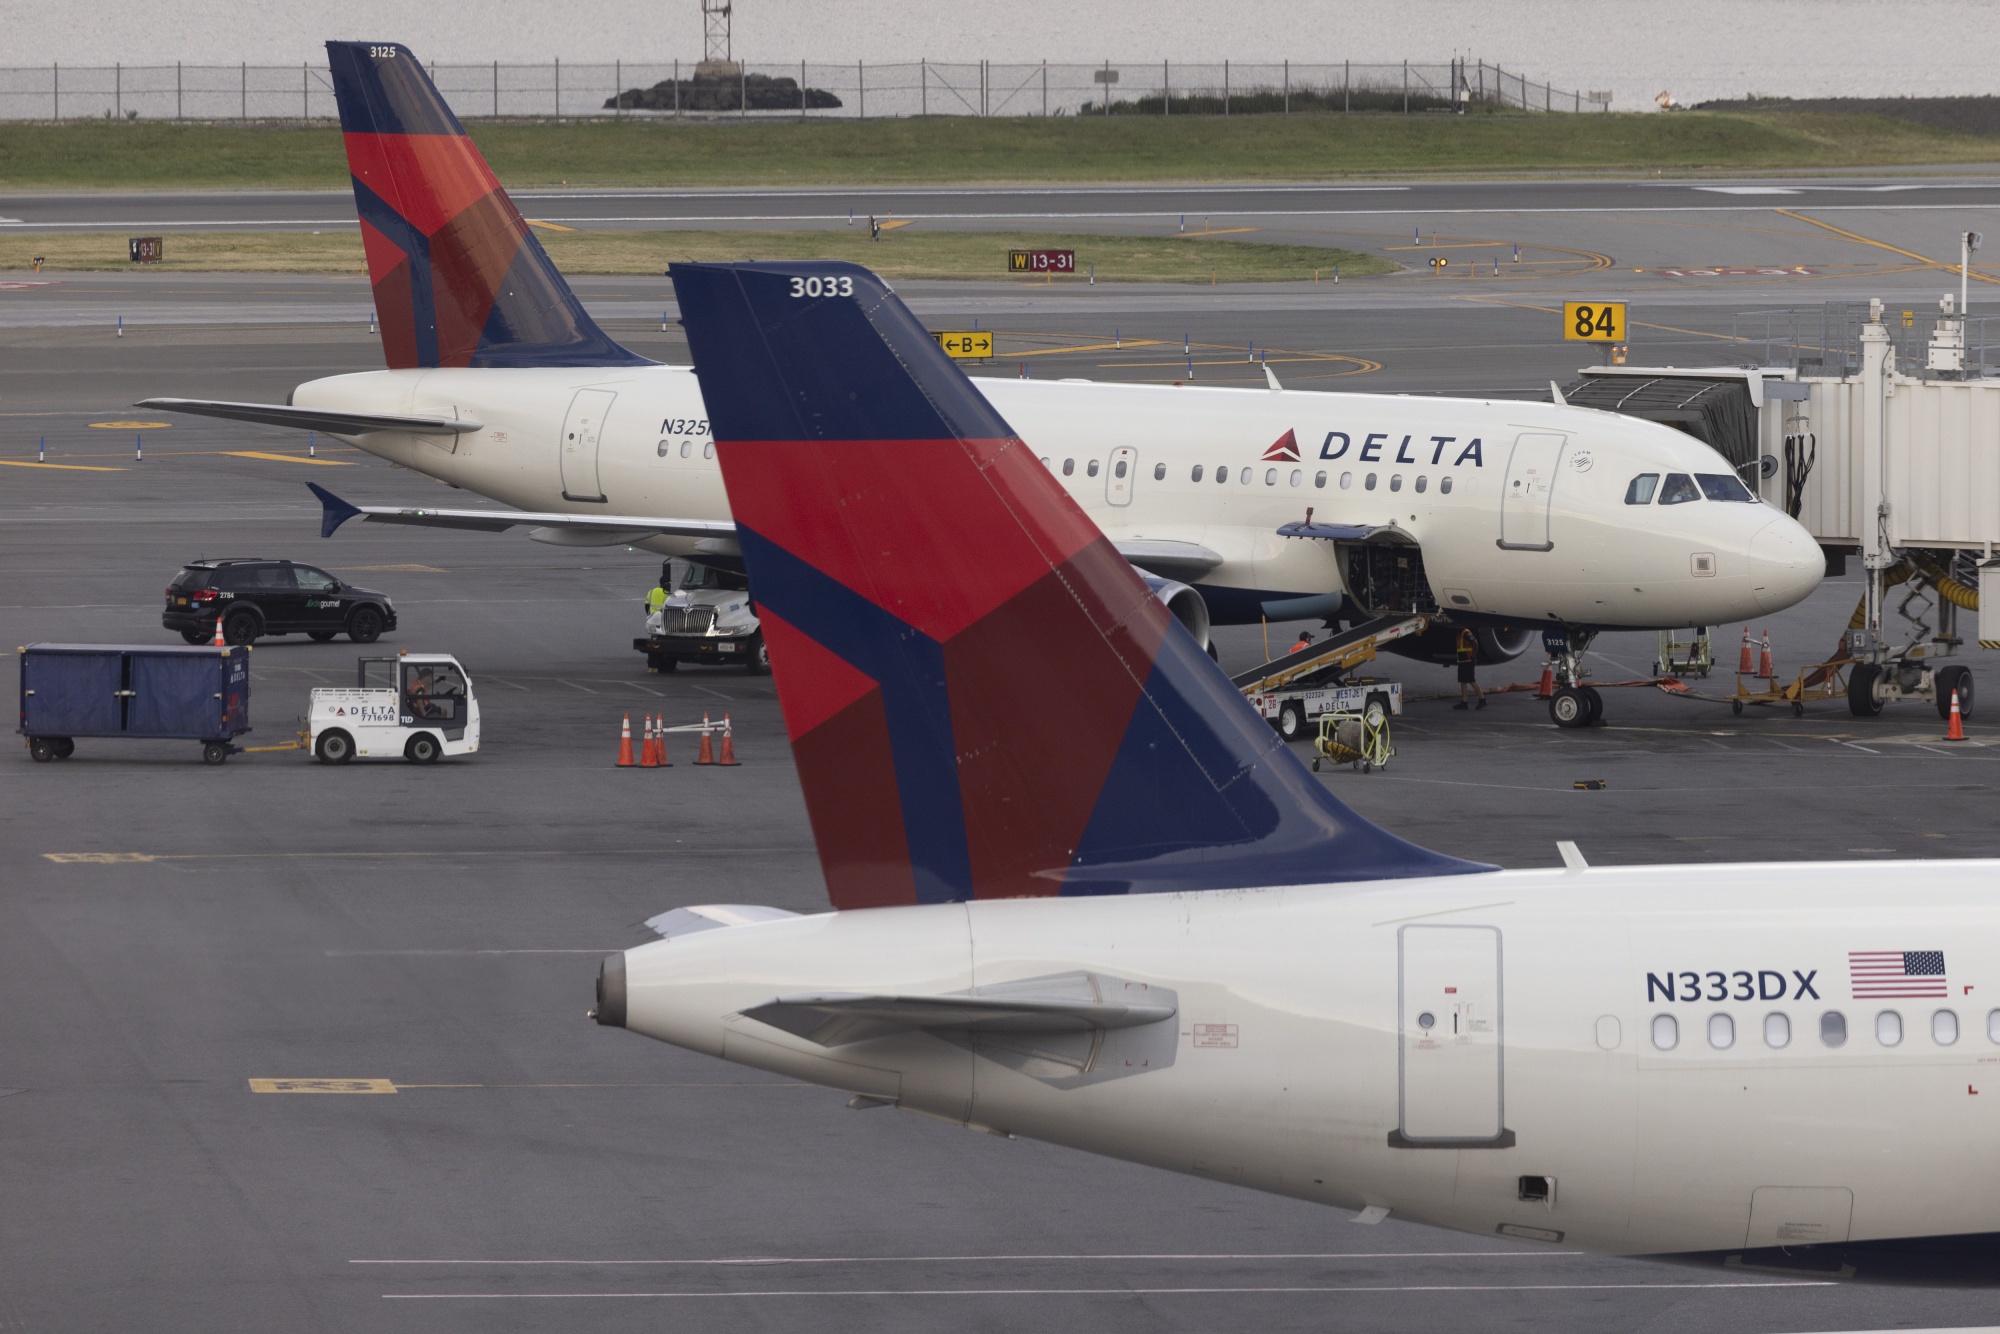 Delta Air Lines says planes serviced with parts with forged safety